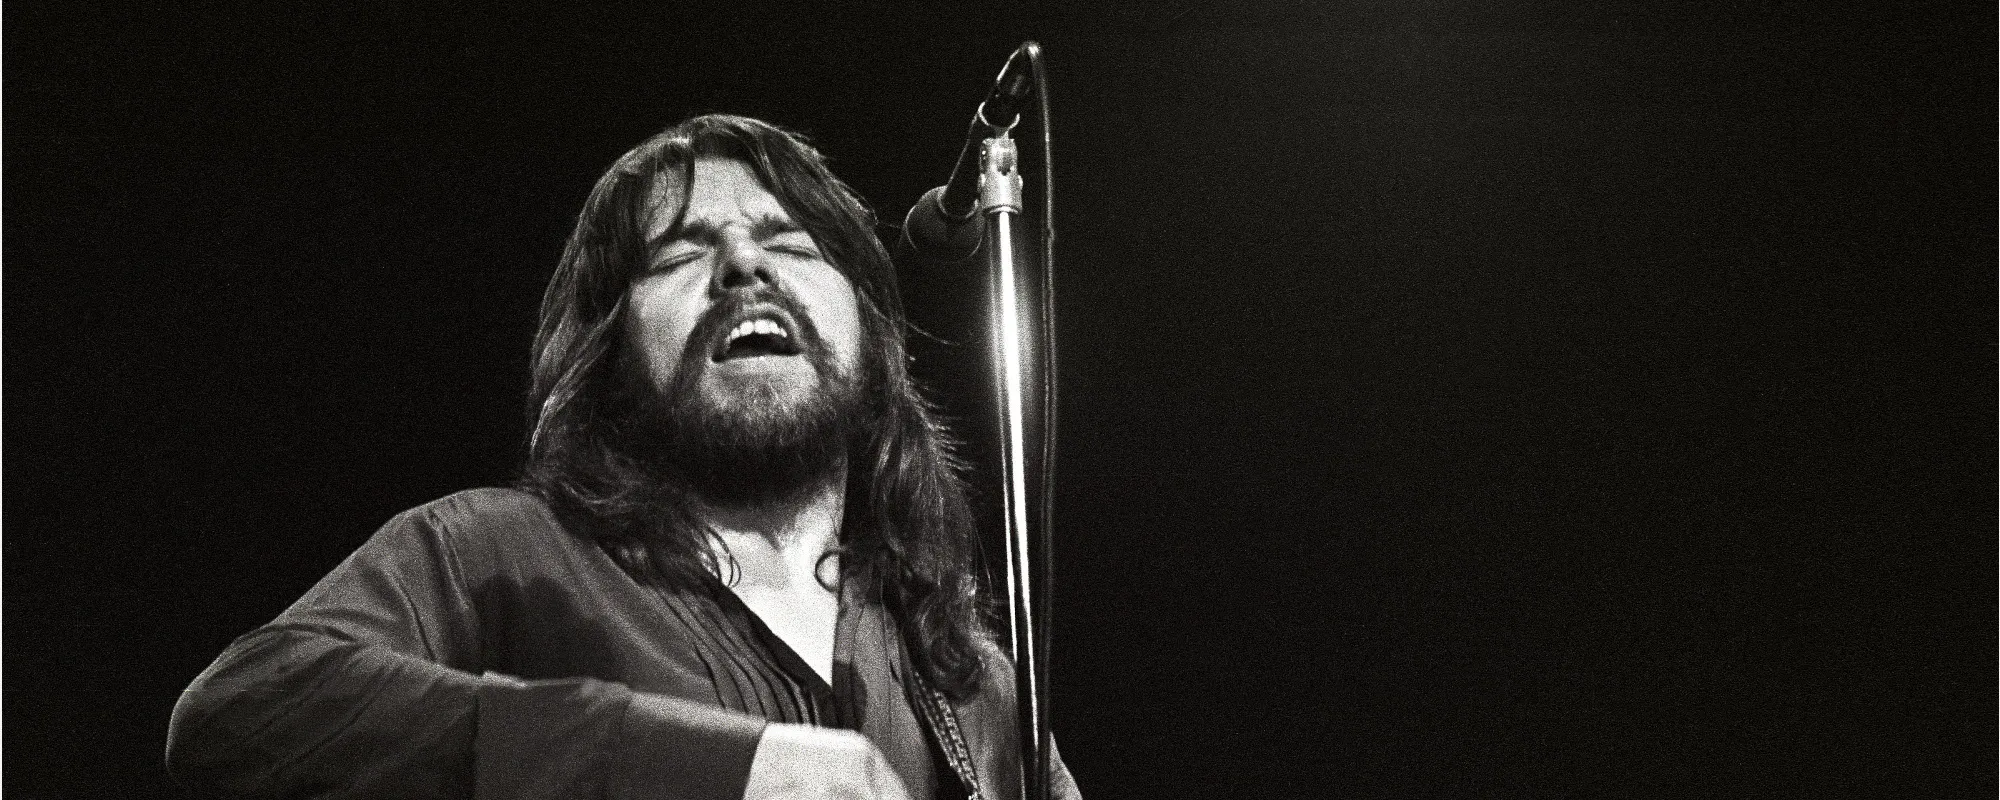 The Meaning Behind Bob Seger and the Silver Bullet Band’s “Hollywood Nights”